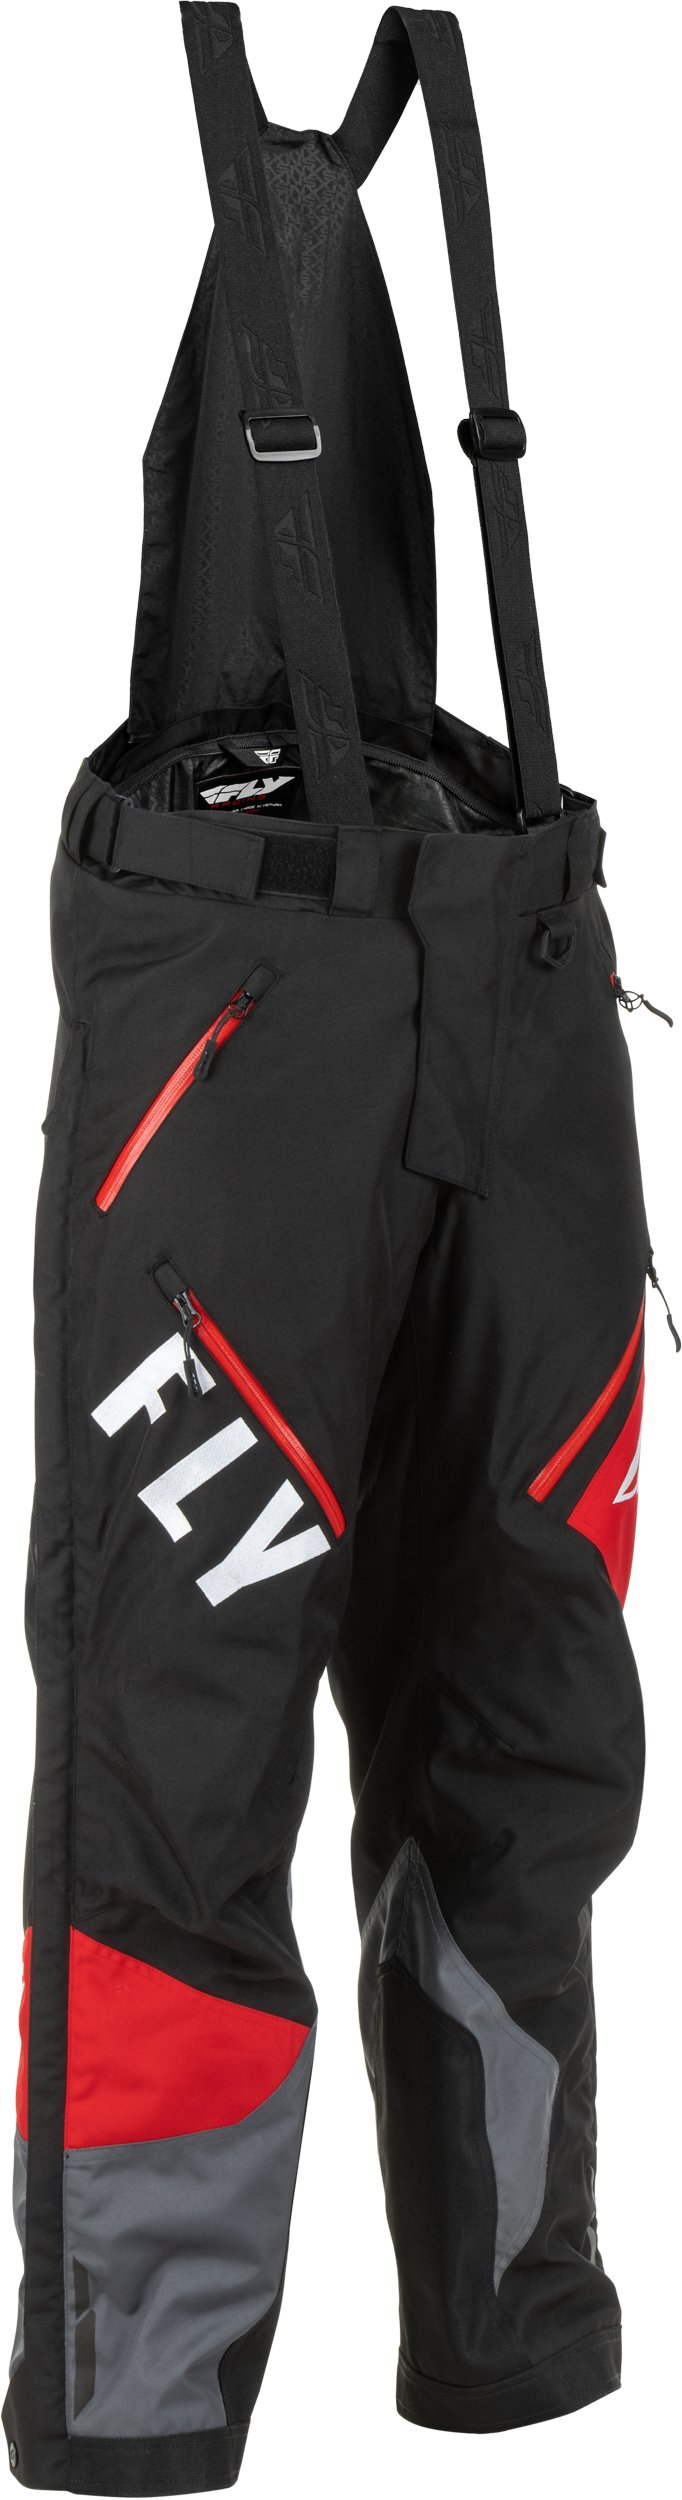 FLY RACING Snx Pro Pants Black/Grey/Red Md 470-4257M